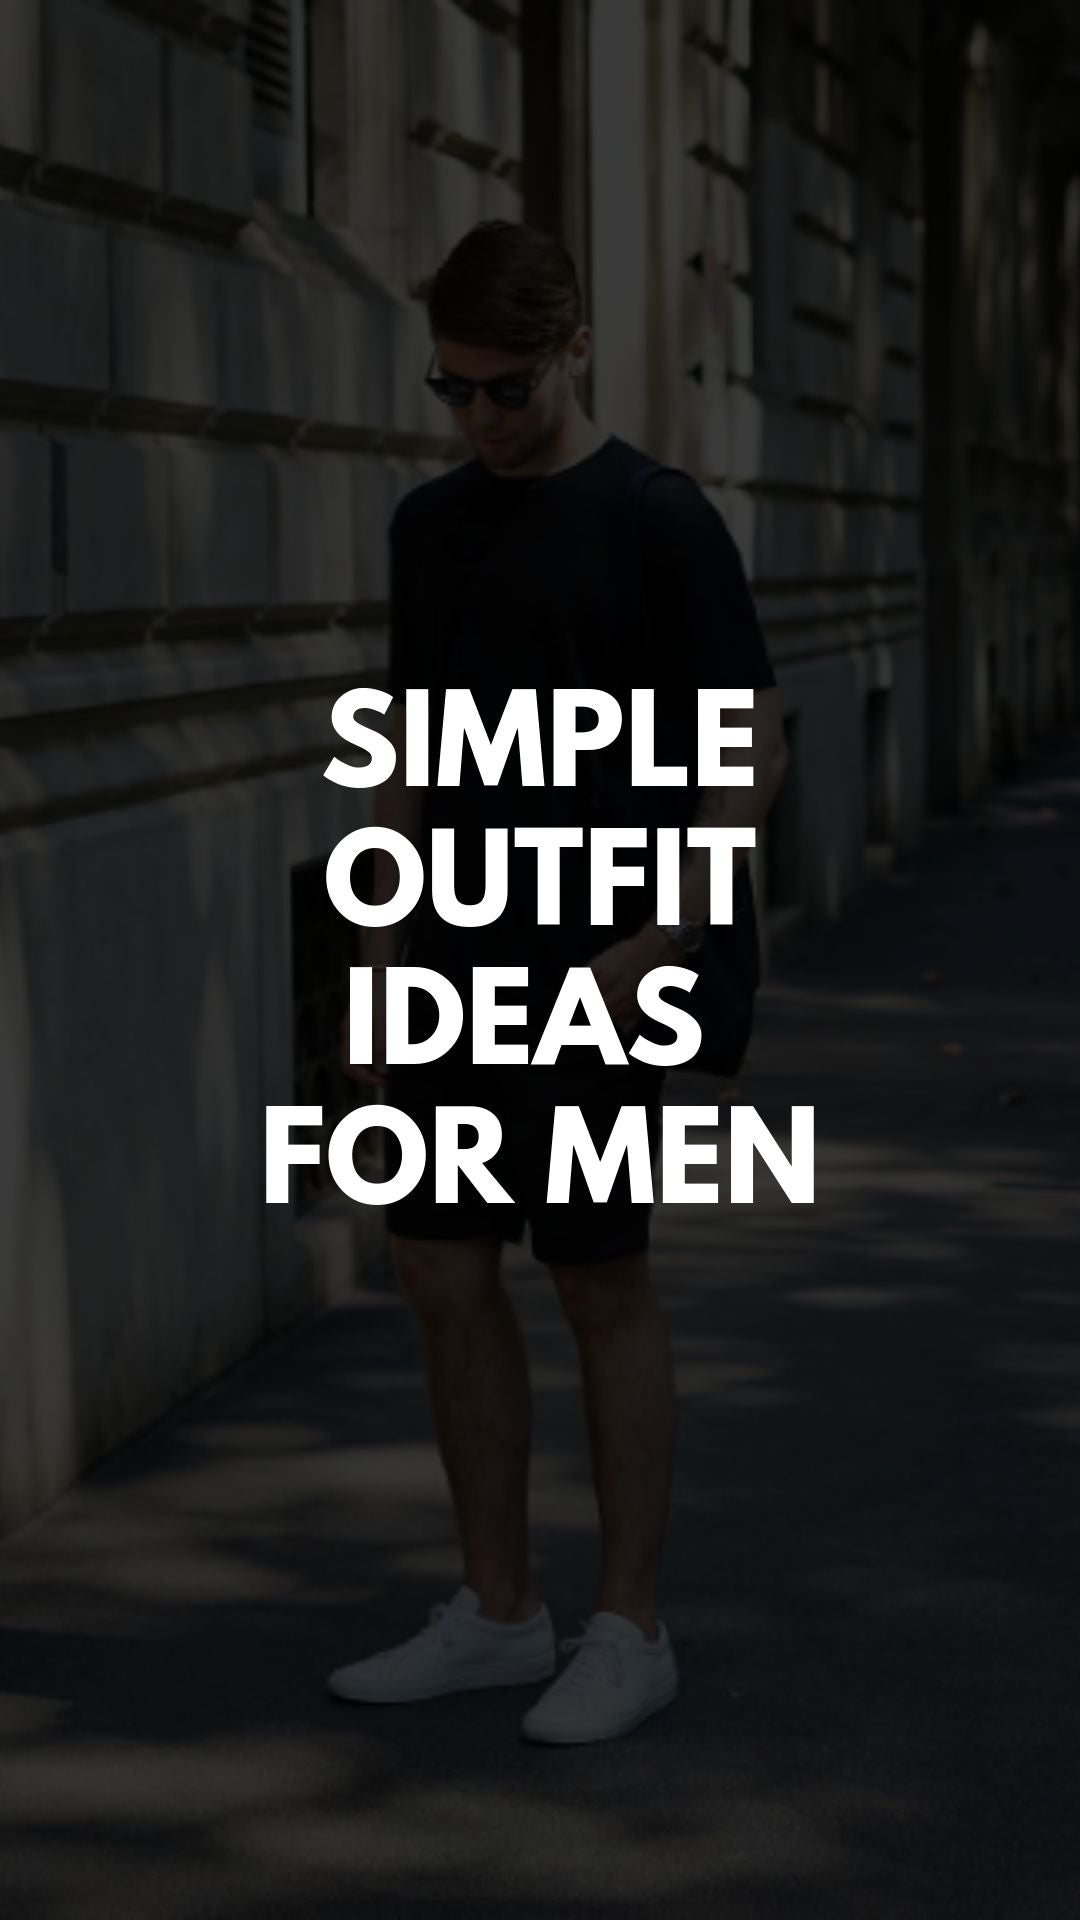 Simple outfit ideas for men #mensfashion #simplestyle #simpleoutfits